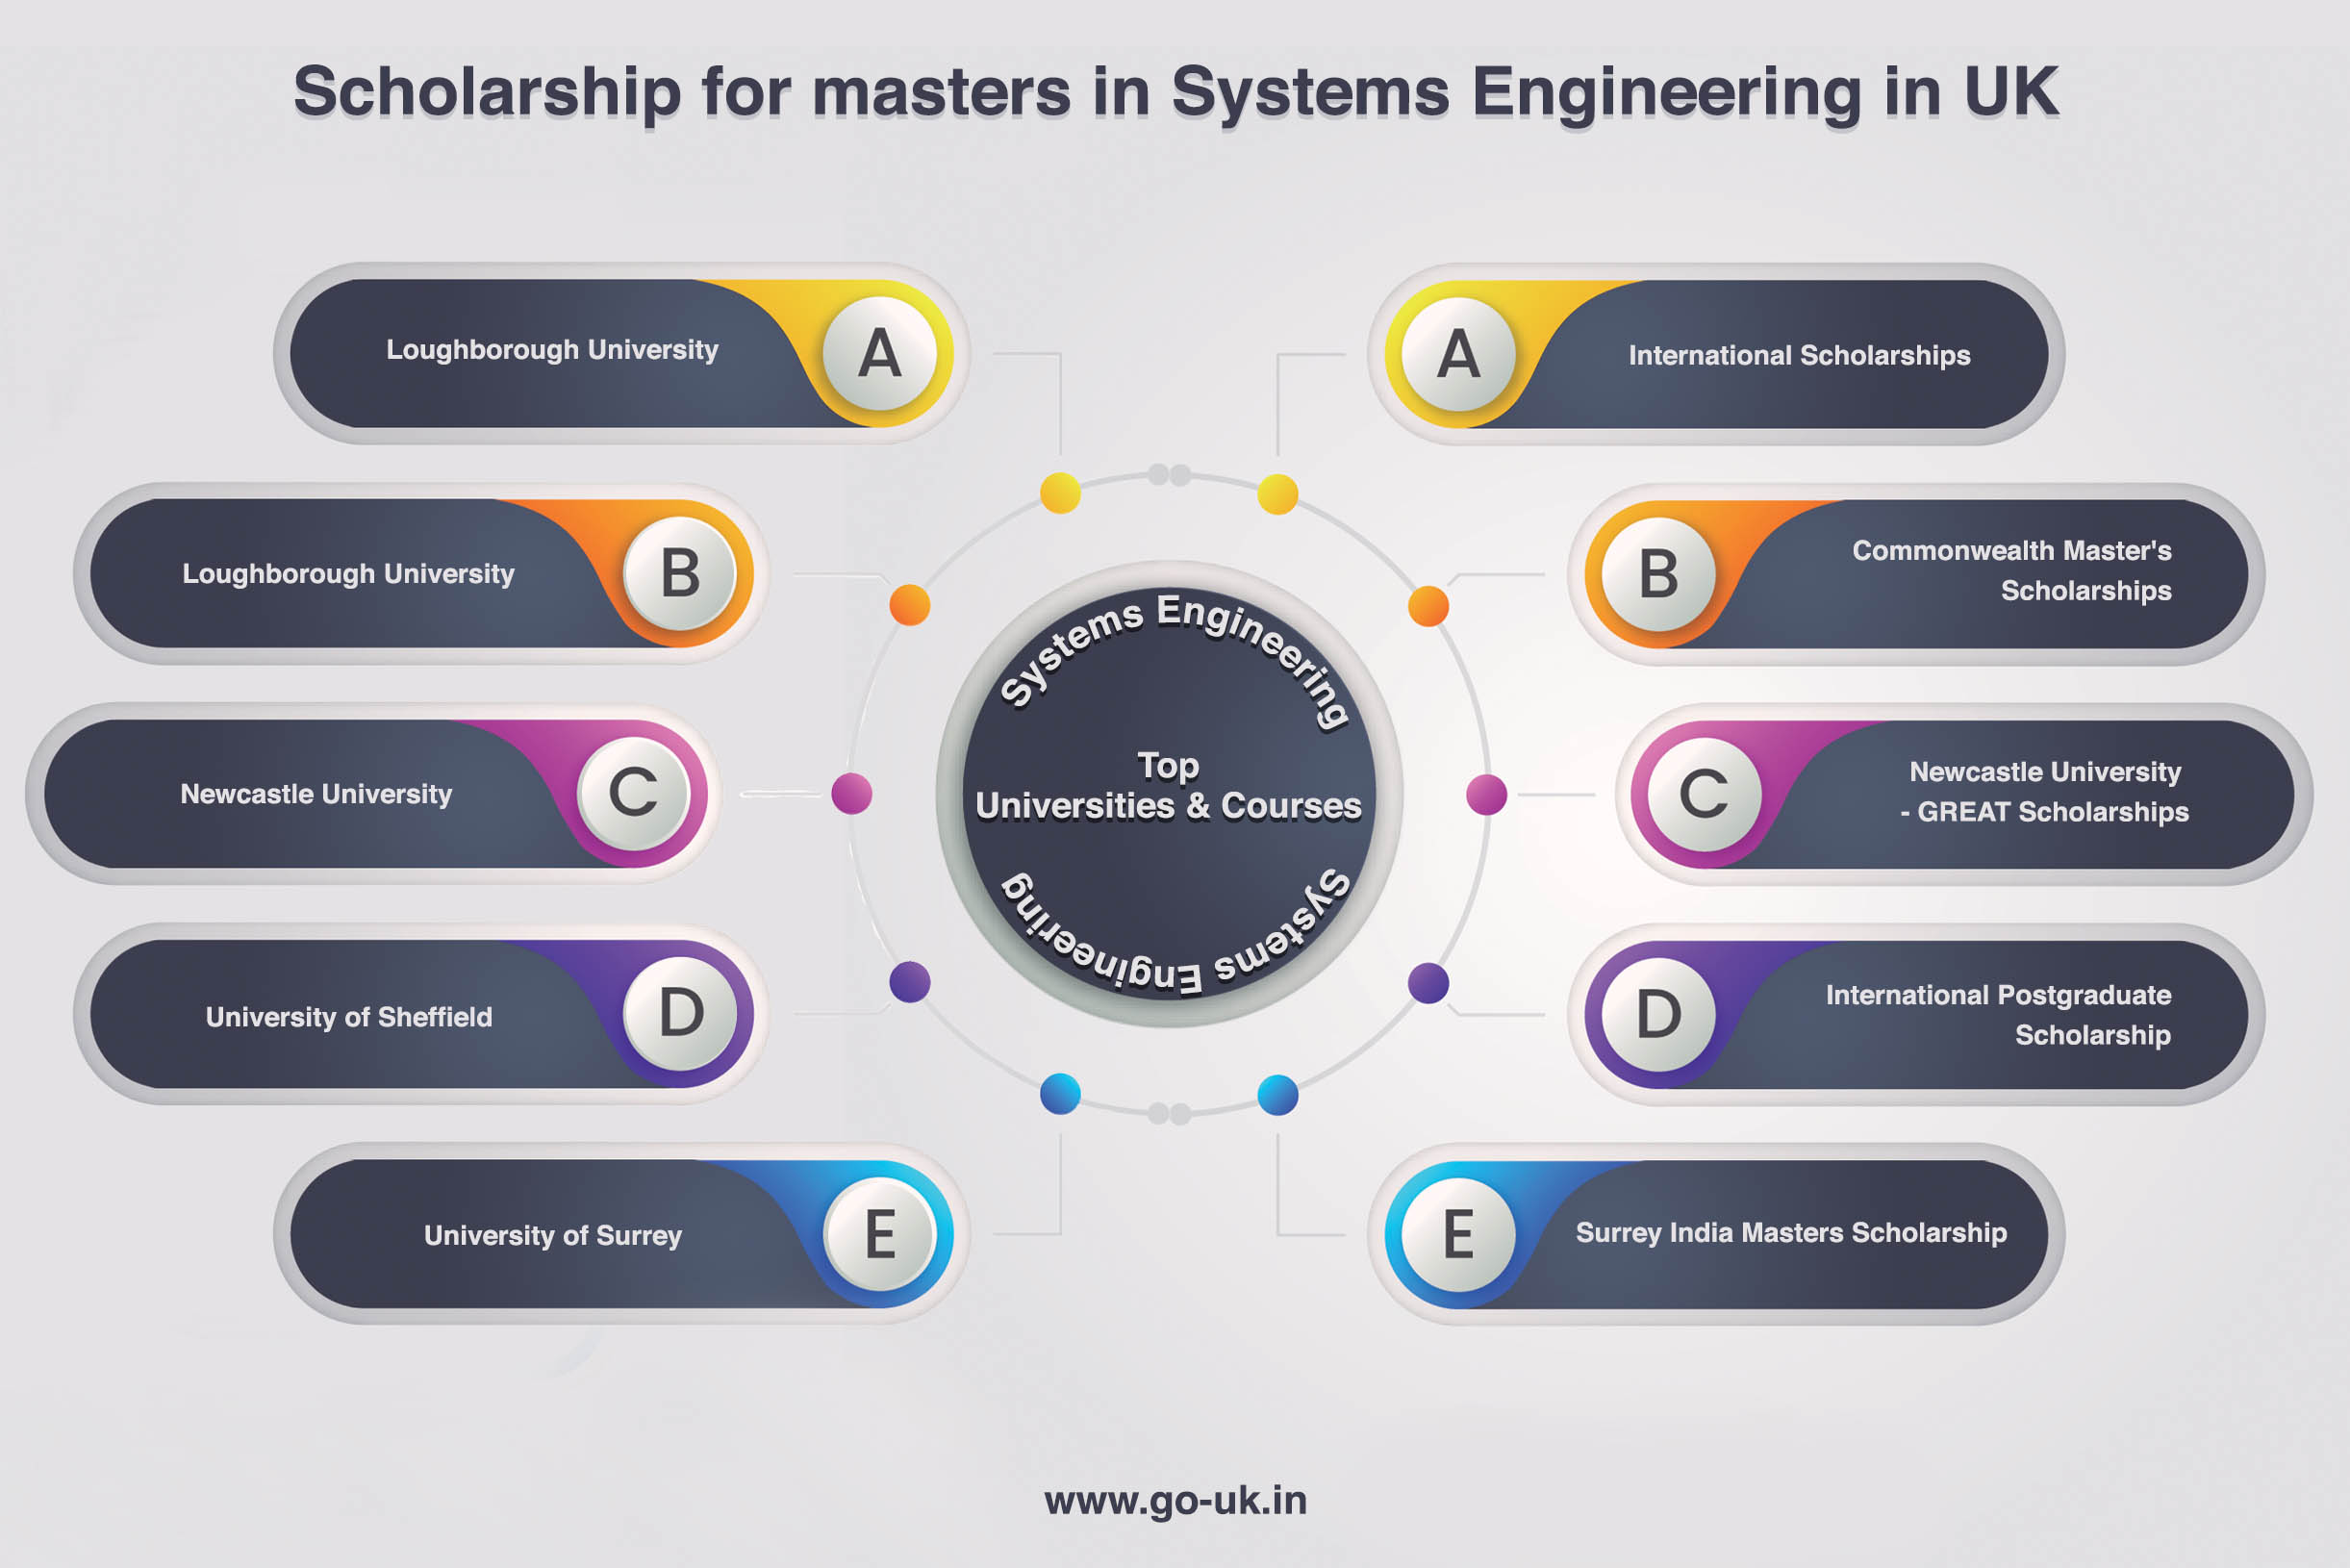 Scholarships for Masters in System Engineering in UK